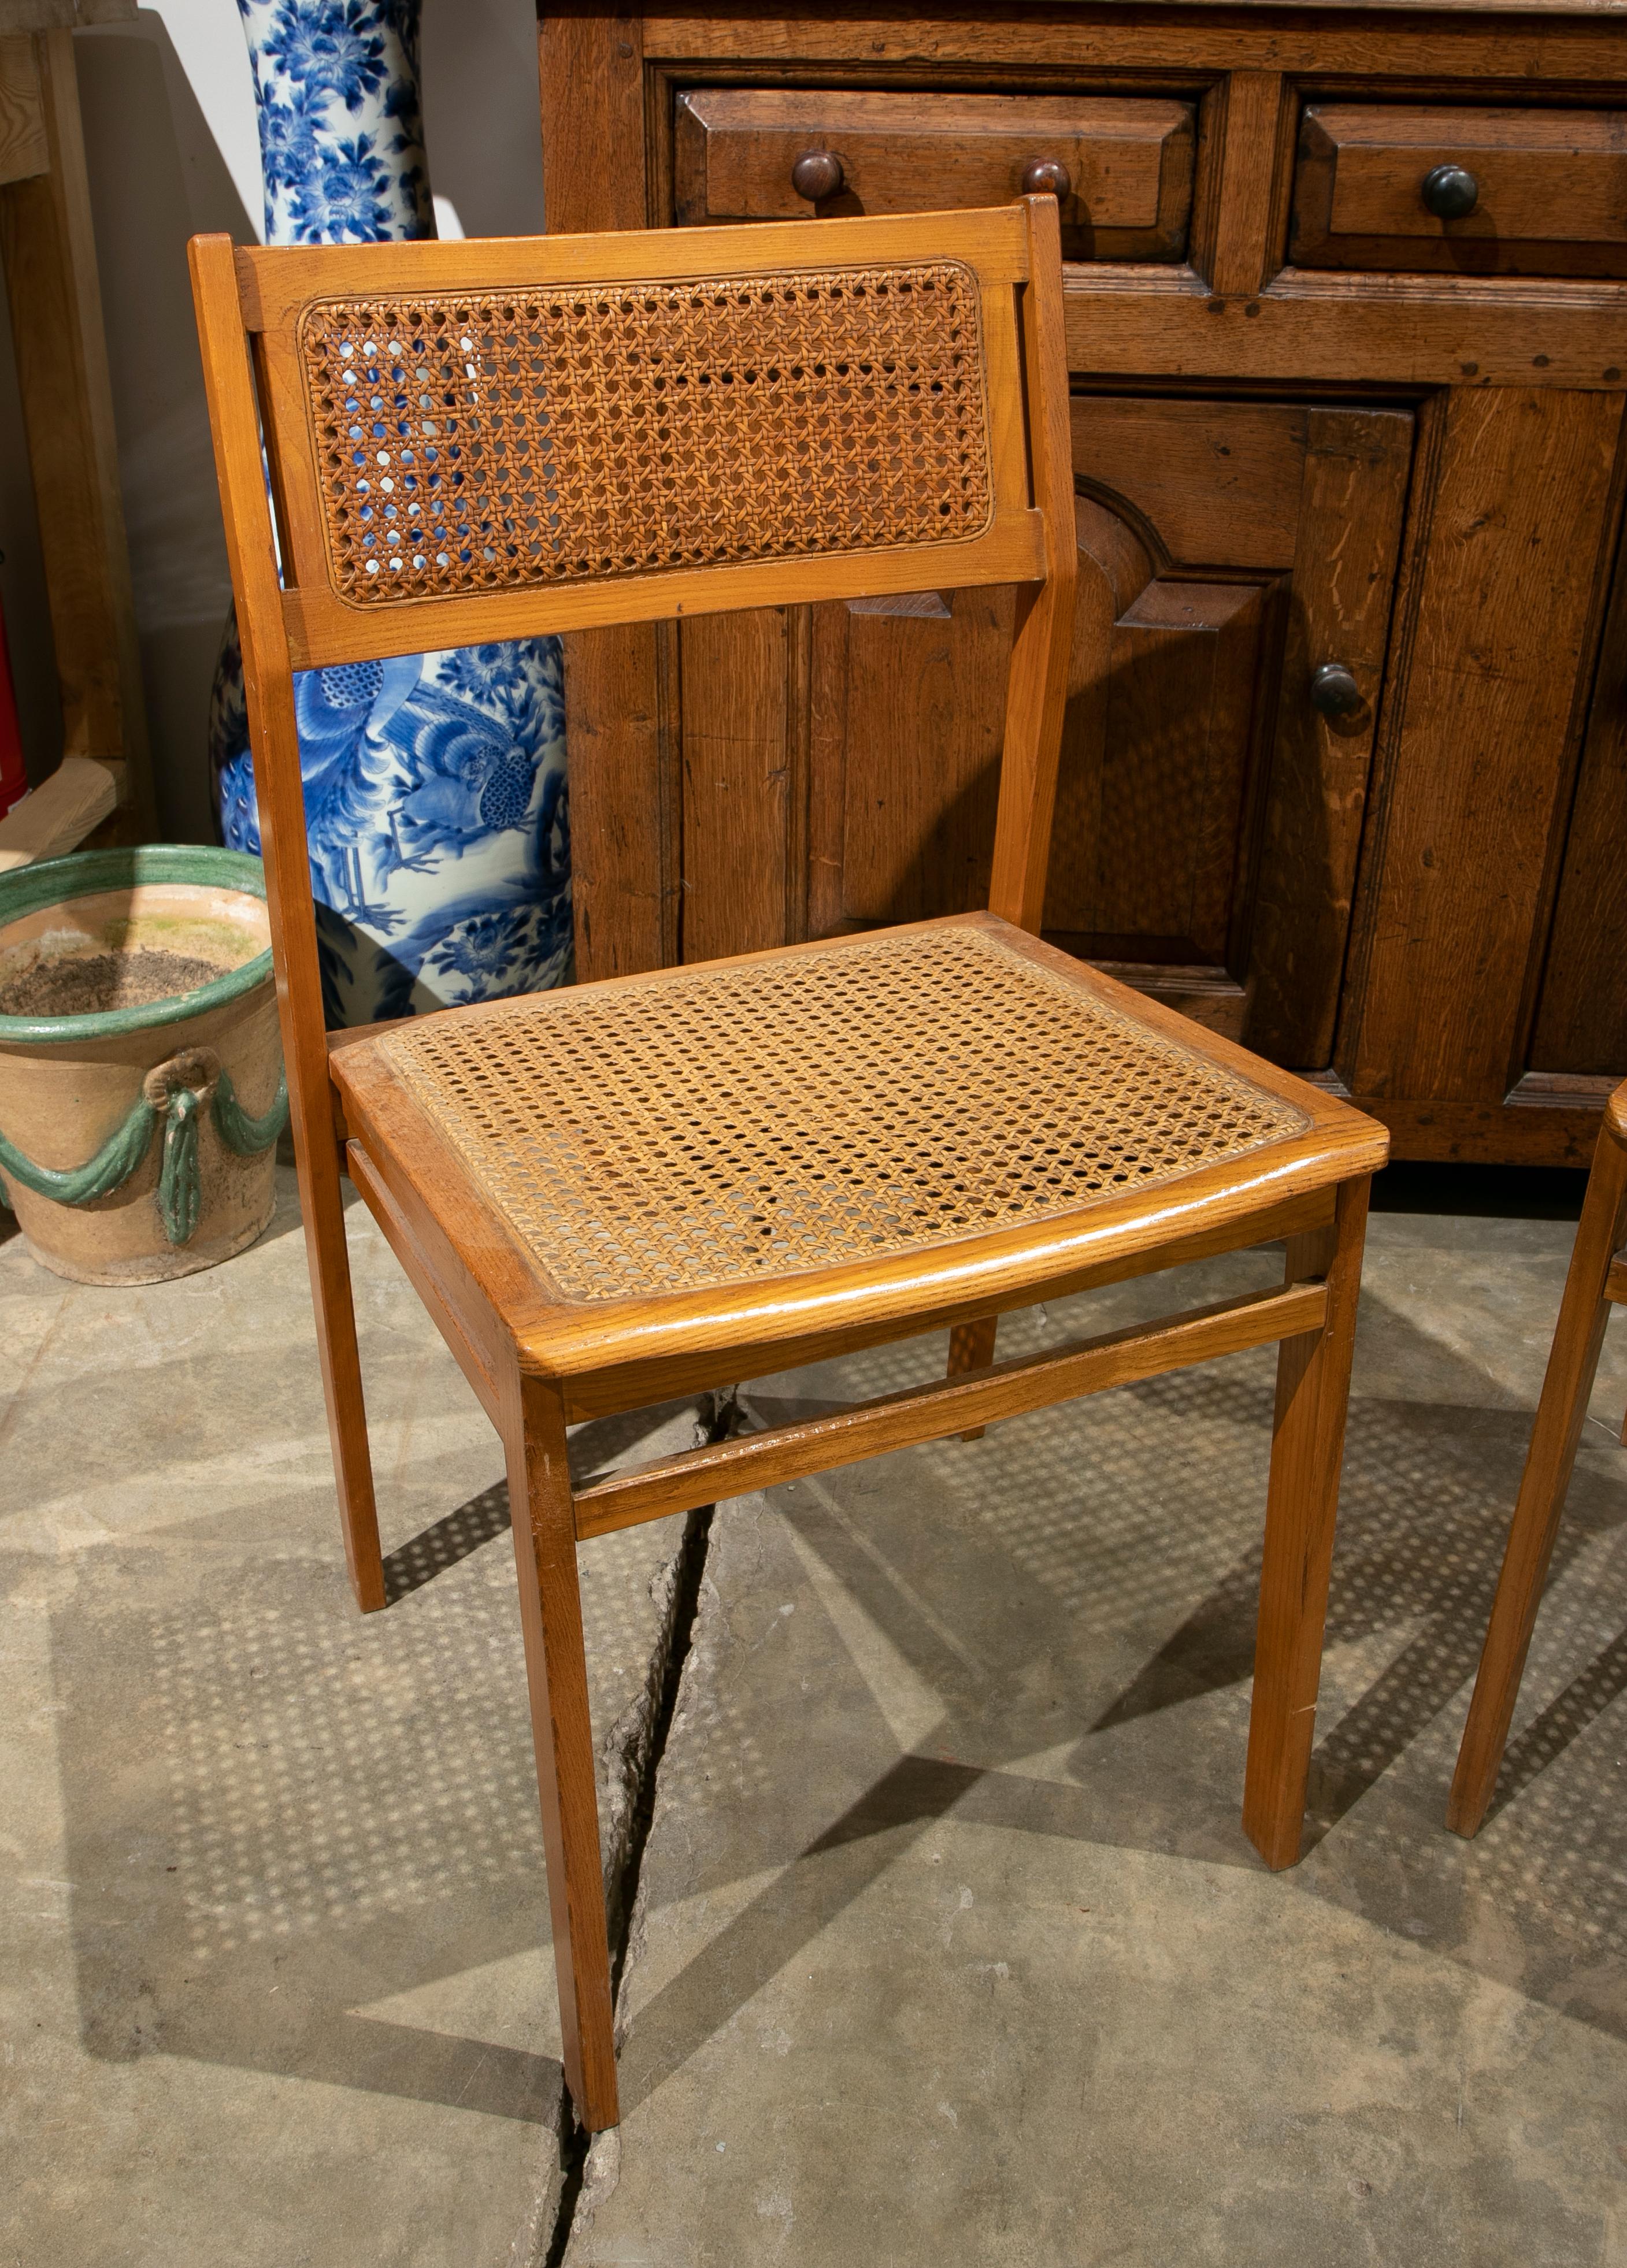 1970s Swedish pair of wooden chairs with wicker seat and back.